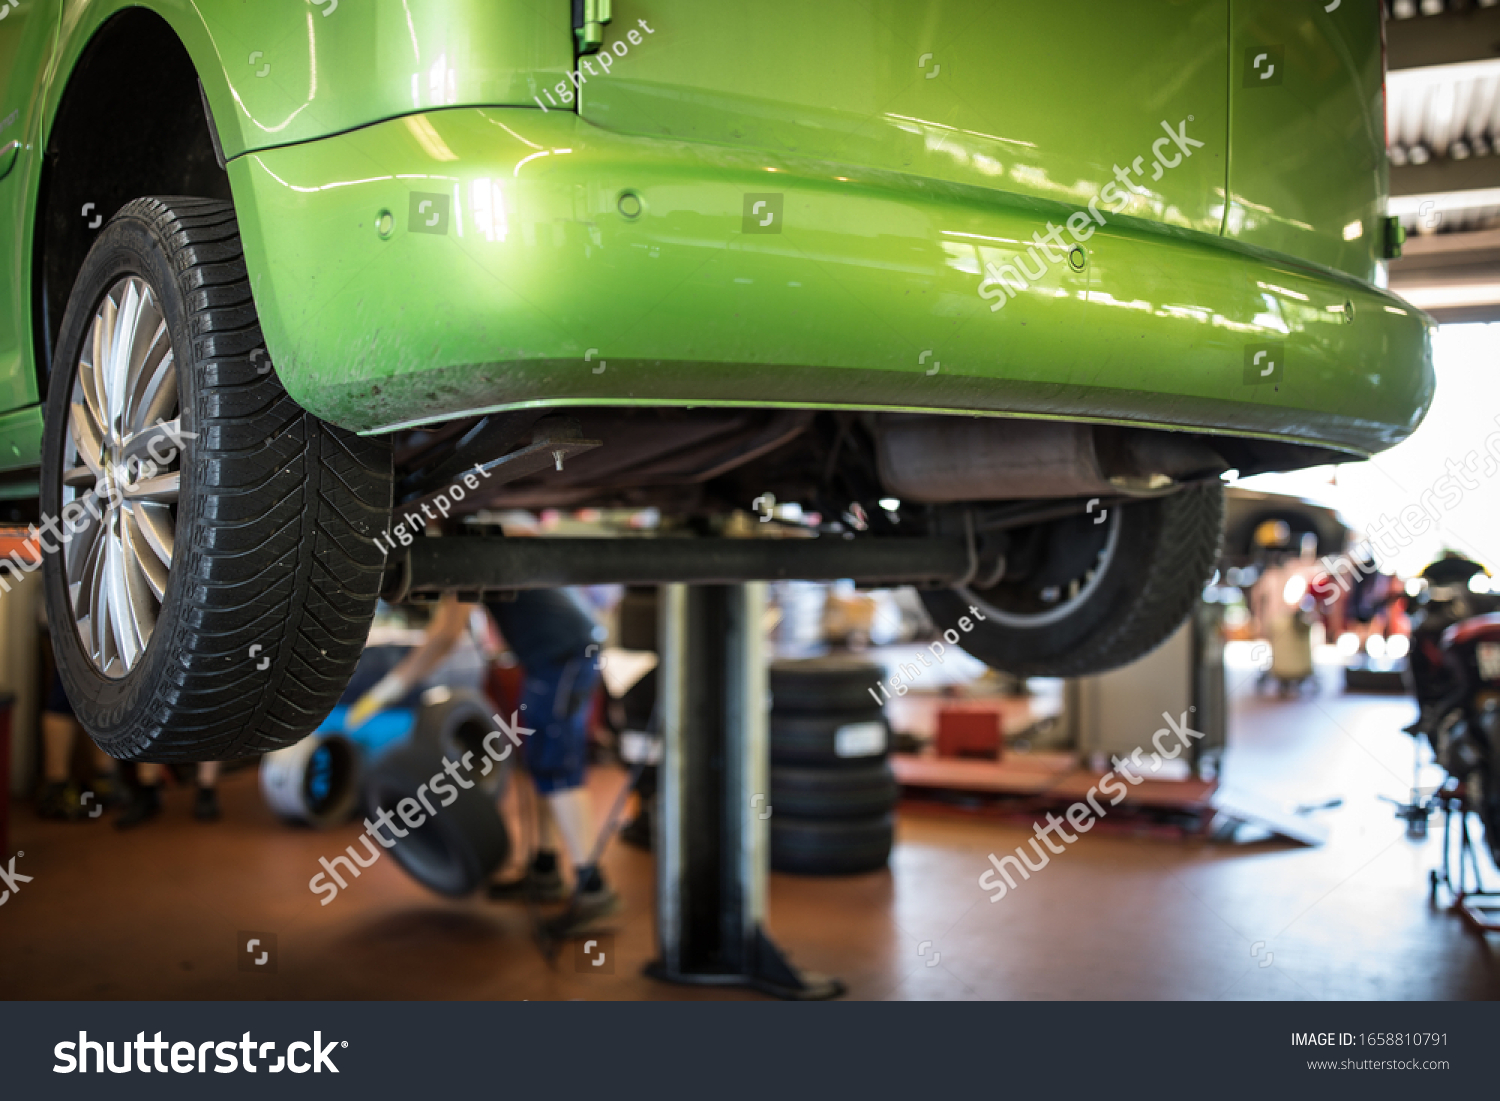 Stock Photo Car In A Garage For Maintenance Oil Tyre Change Shallow Dof Color Toned Image 1658810791 